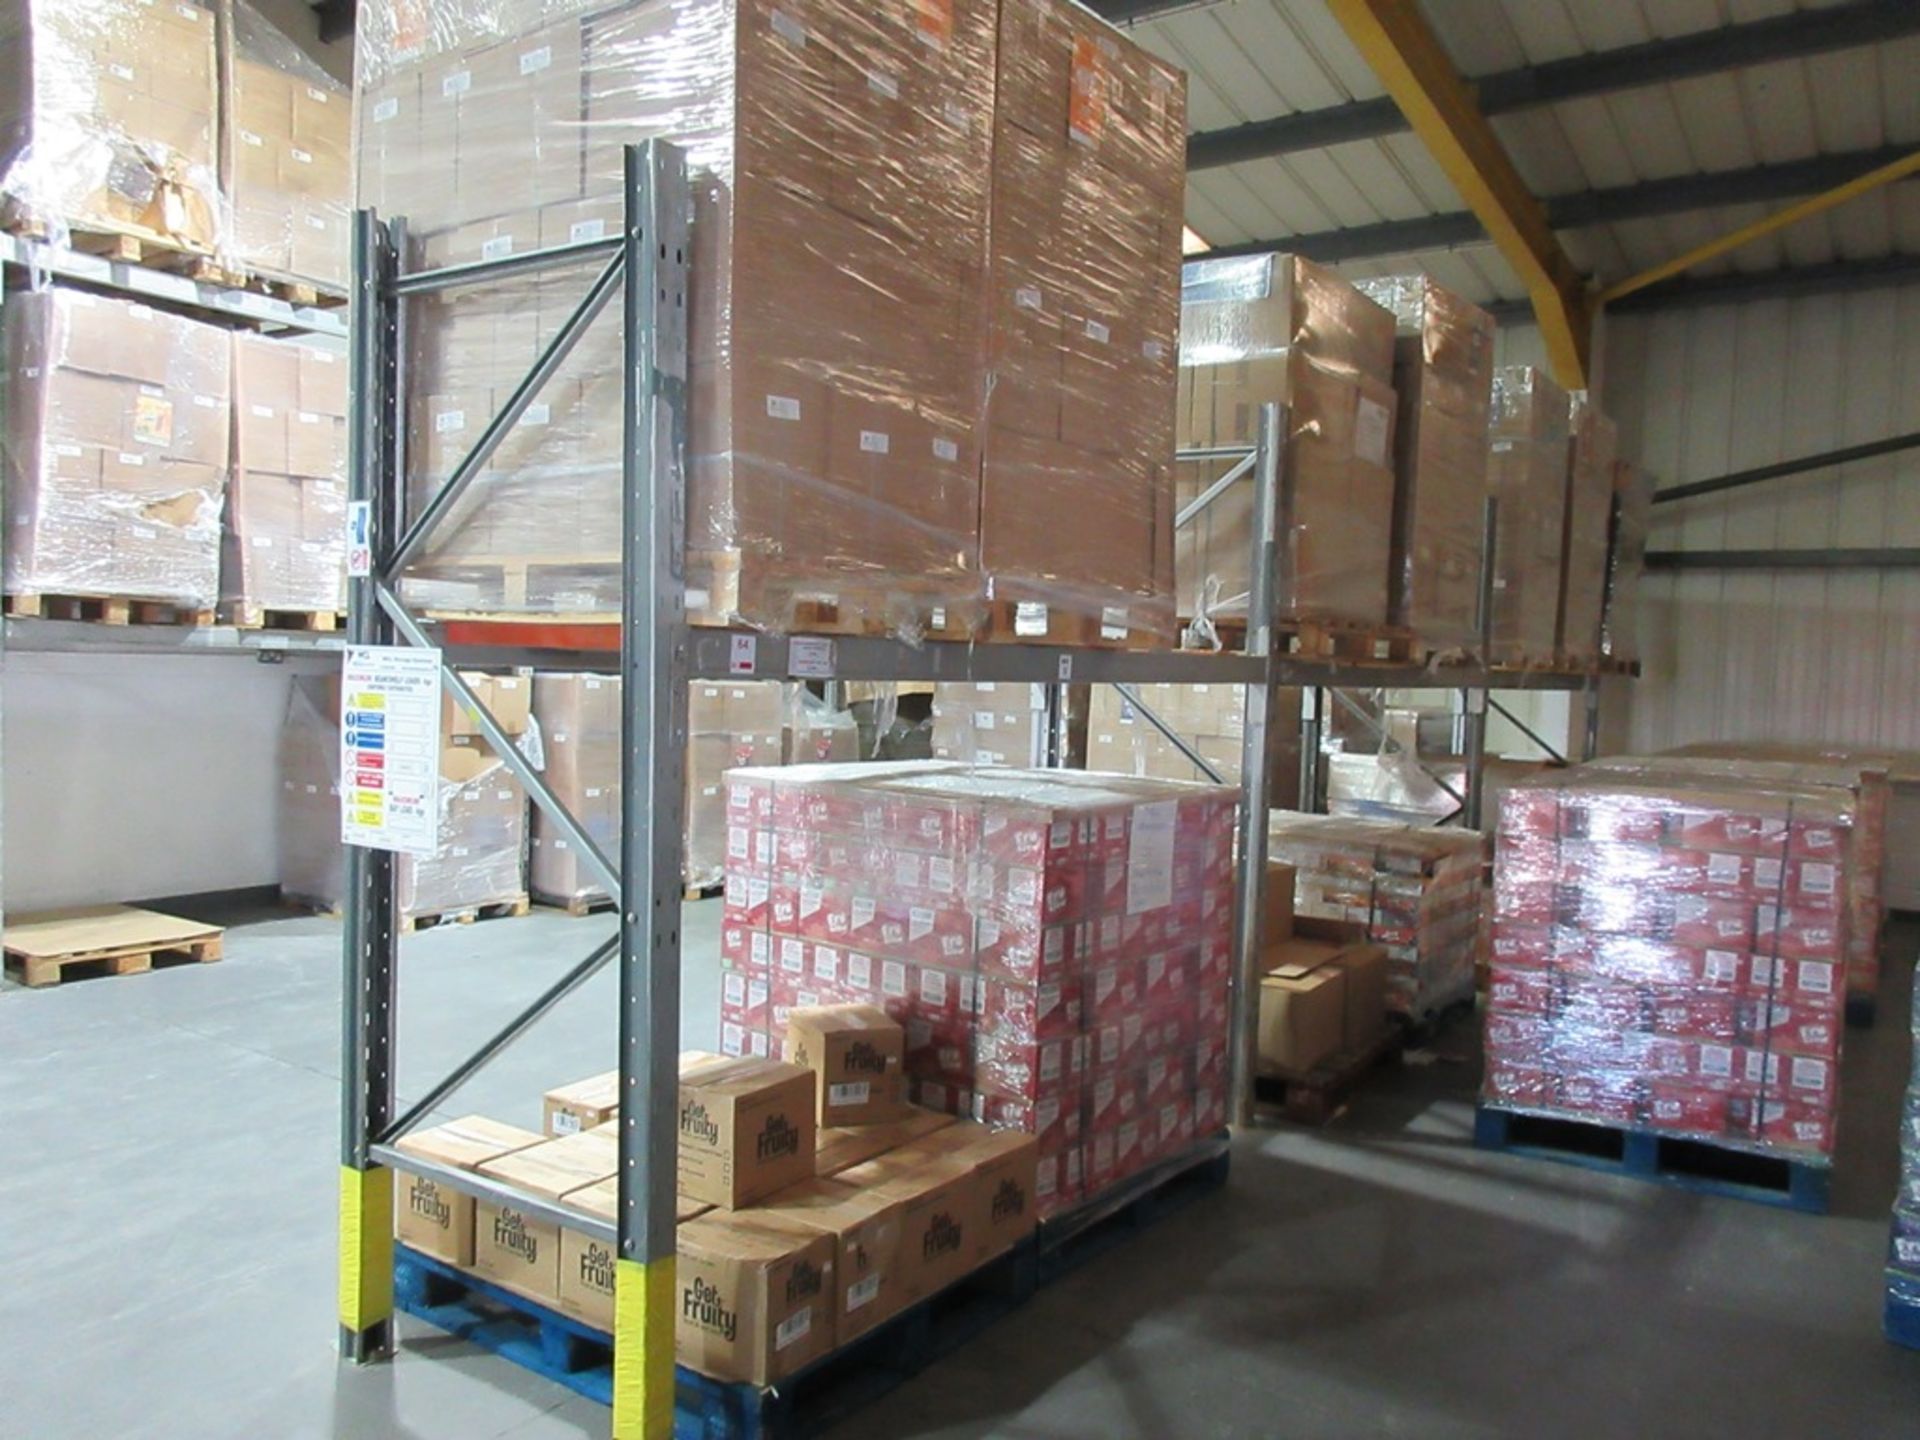 Seven bays of adjustable boltless pallet racking, approx. sizes: 3 x 2.7m x 900mm x H: 2.4m / 4 x